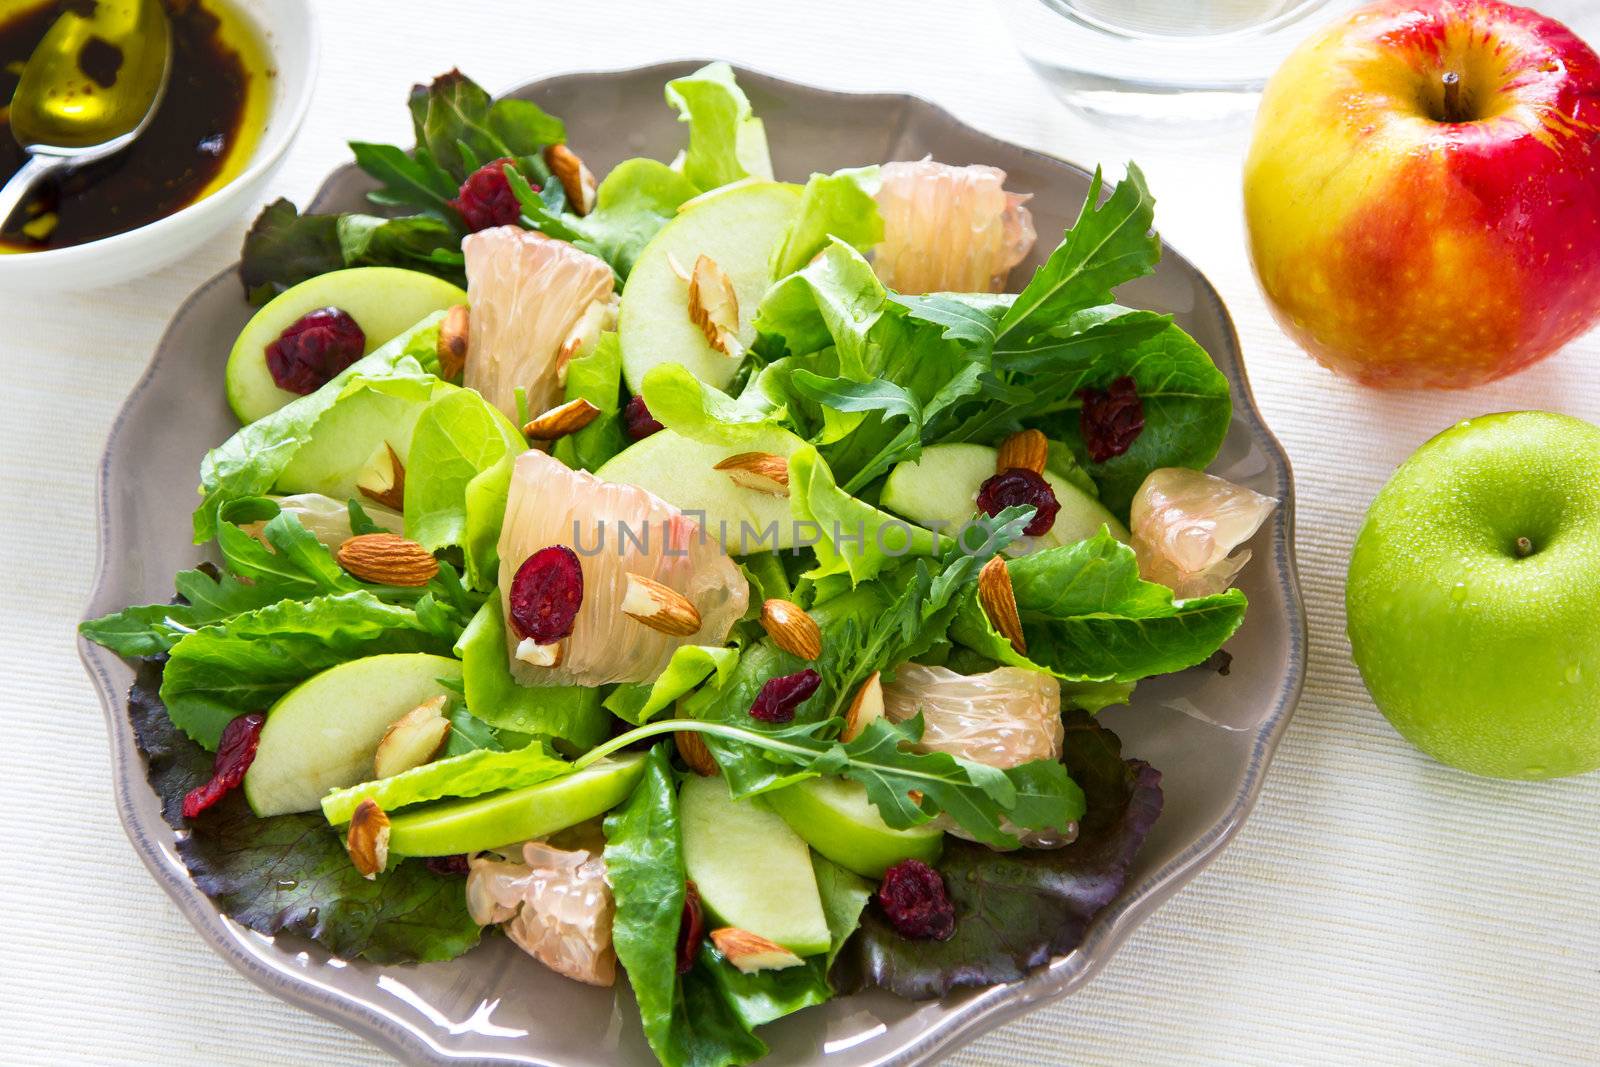 Apple,Grapefruit with cranberry and almond salad by Balsamic dressing